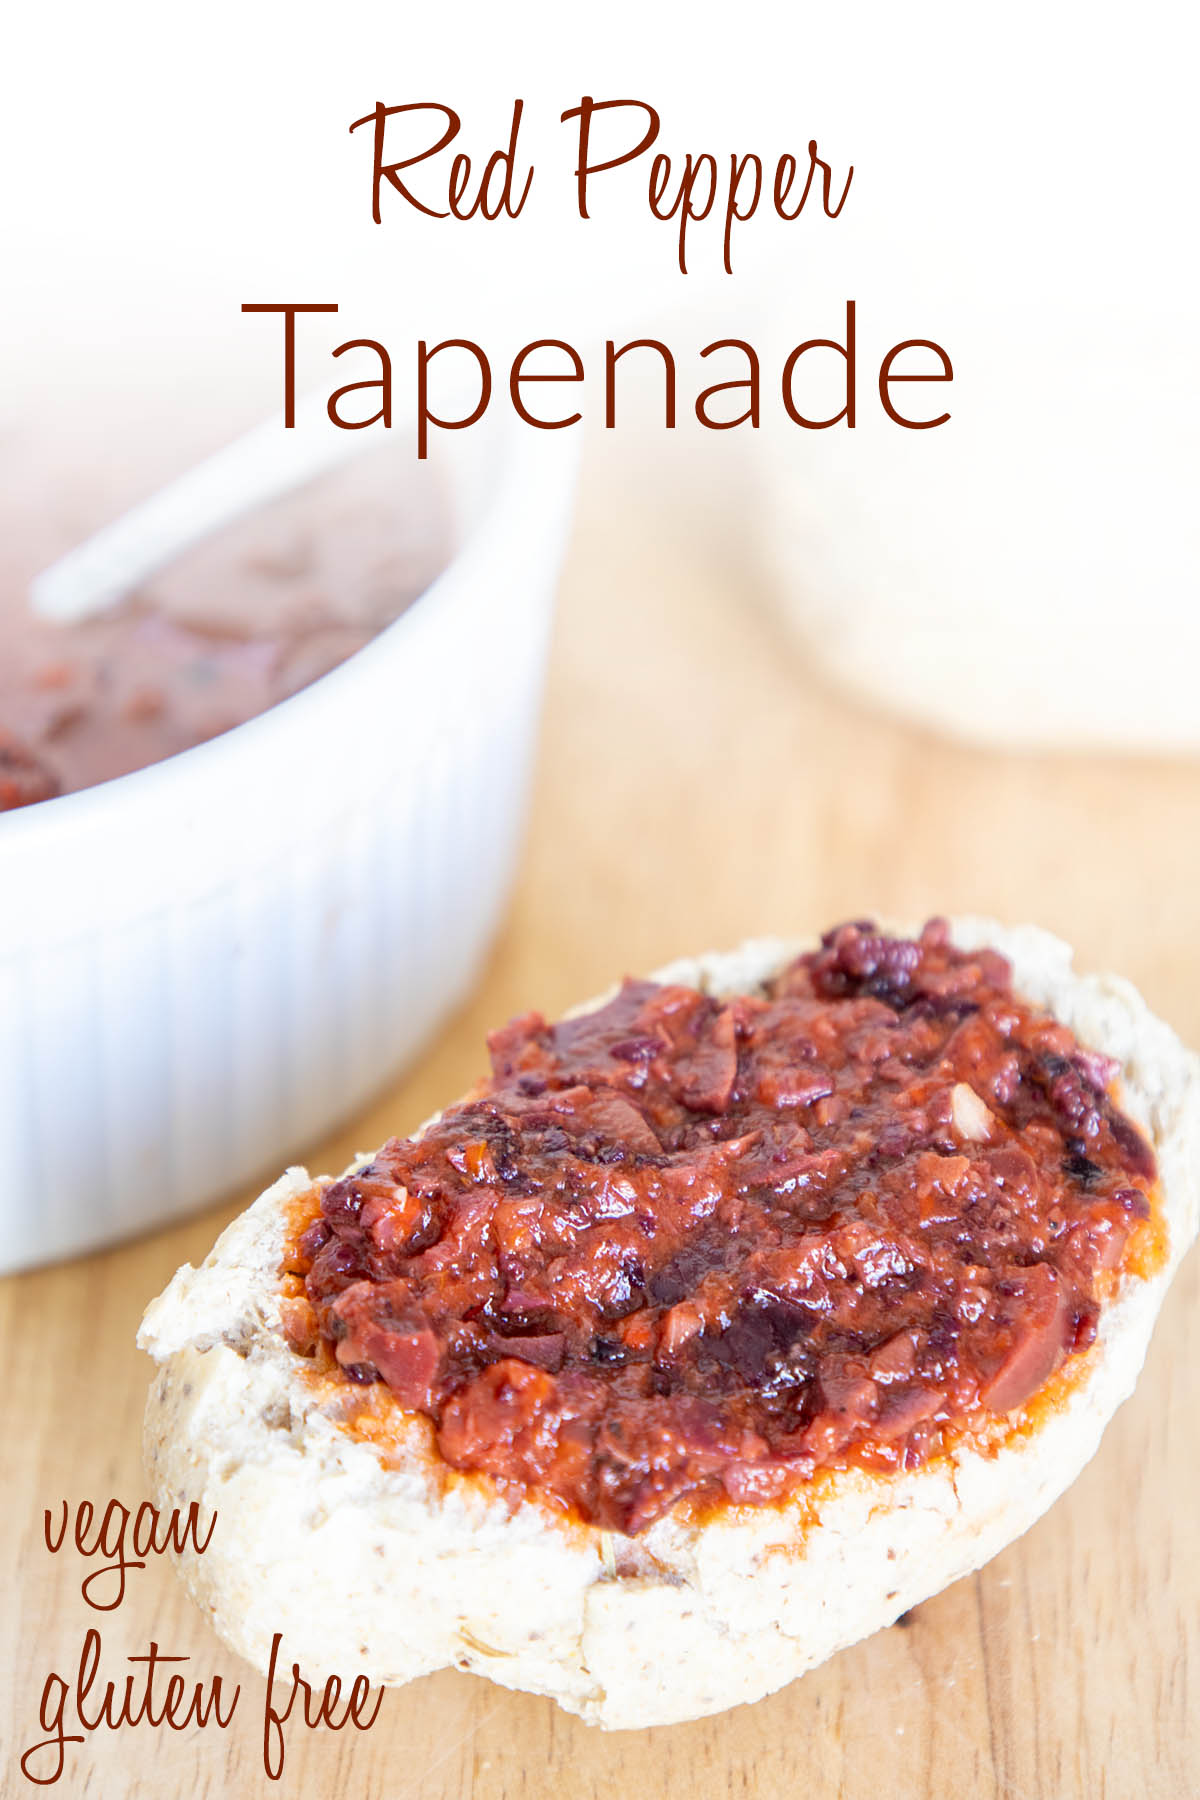 Red Pepper Tapenade photo with text.